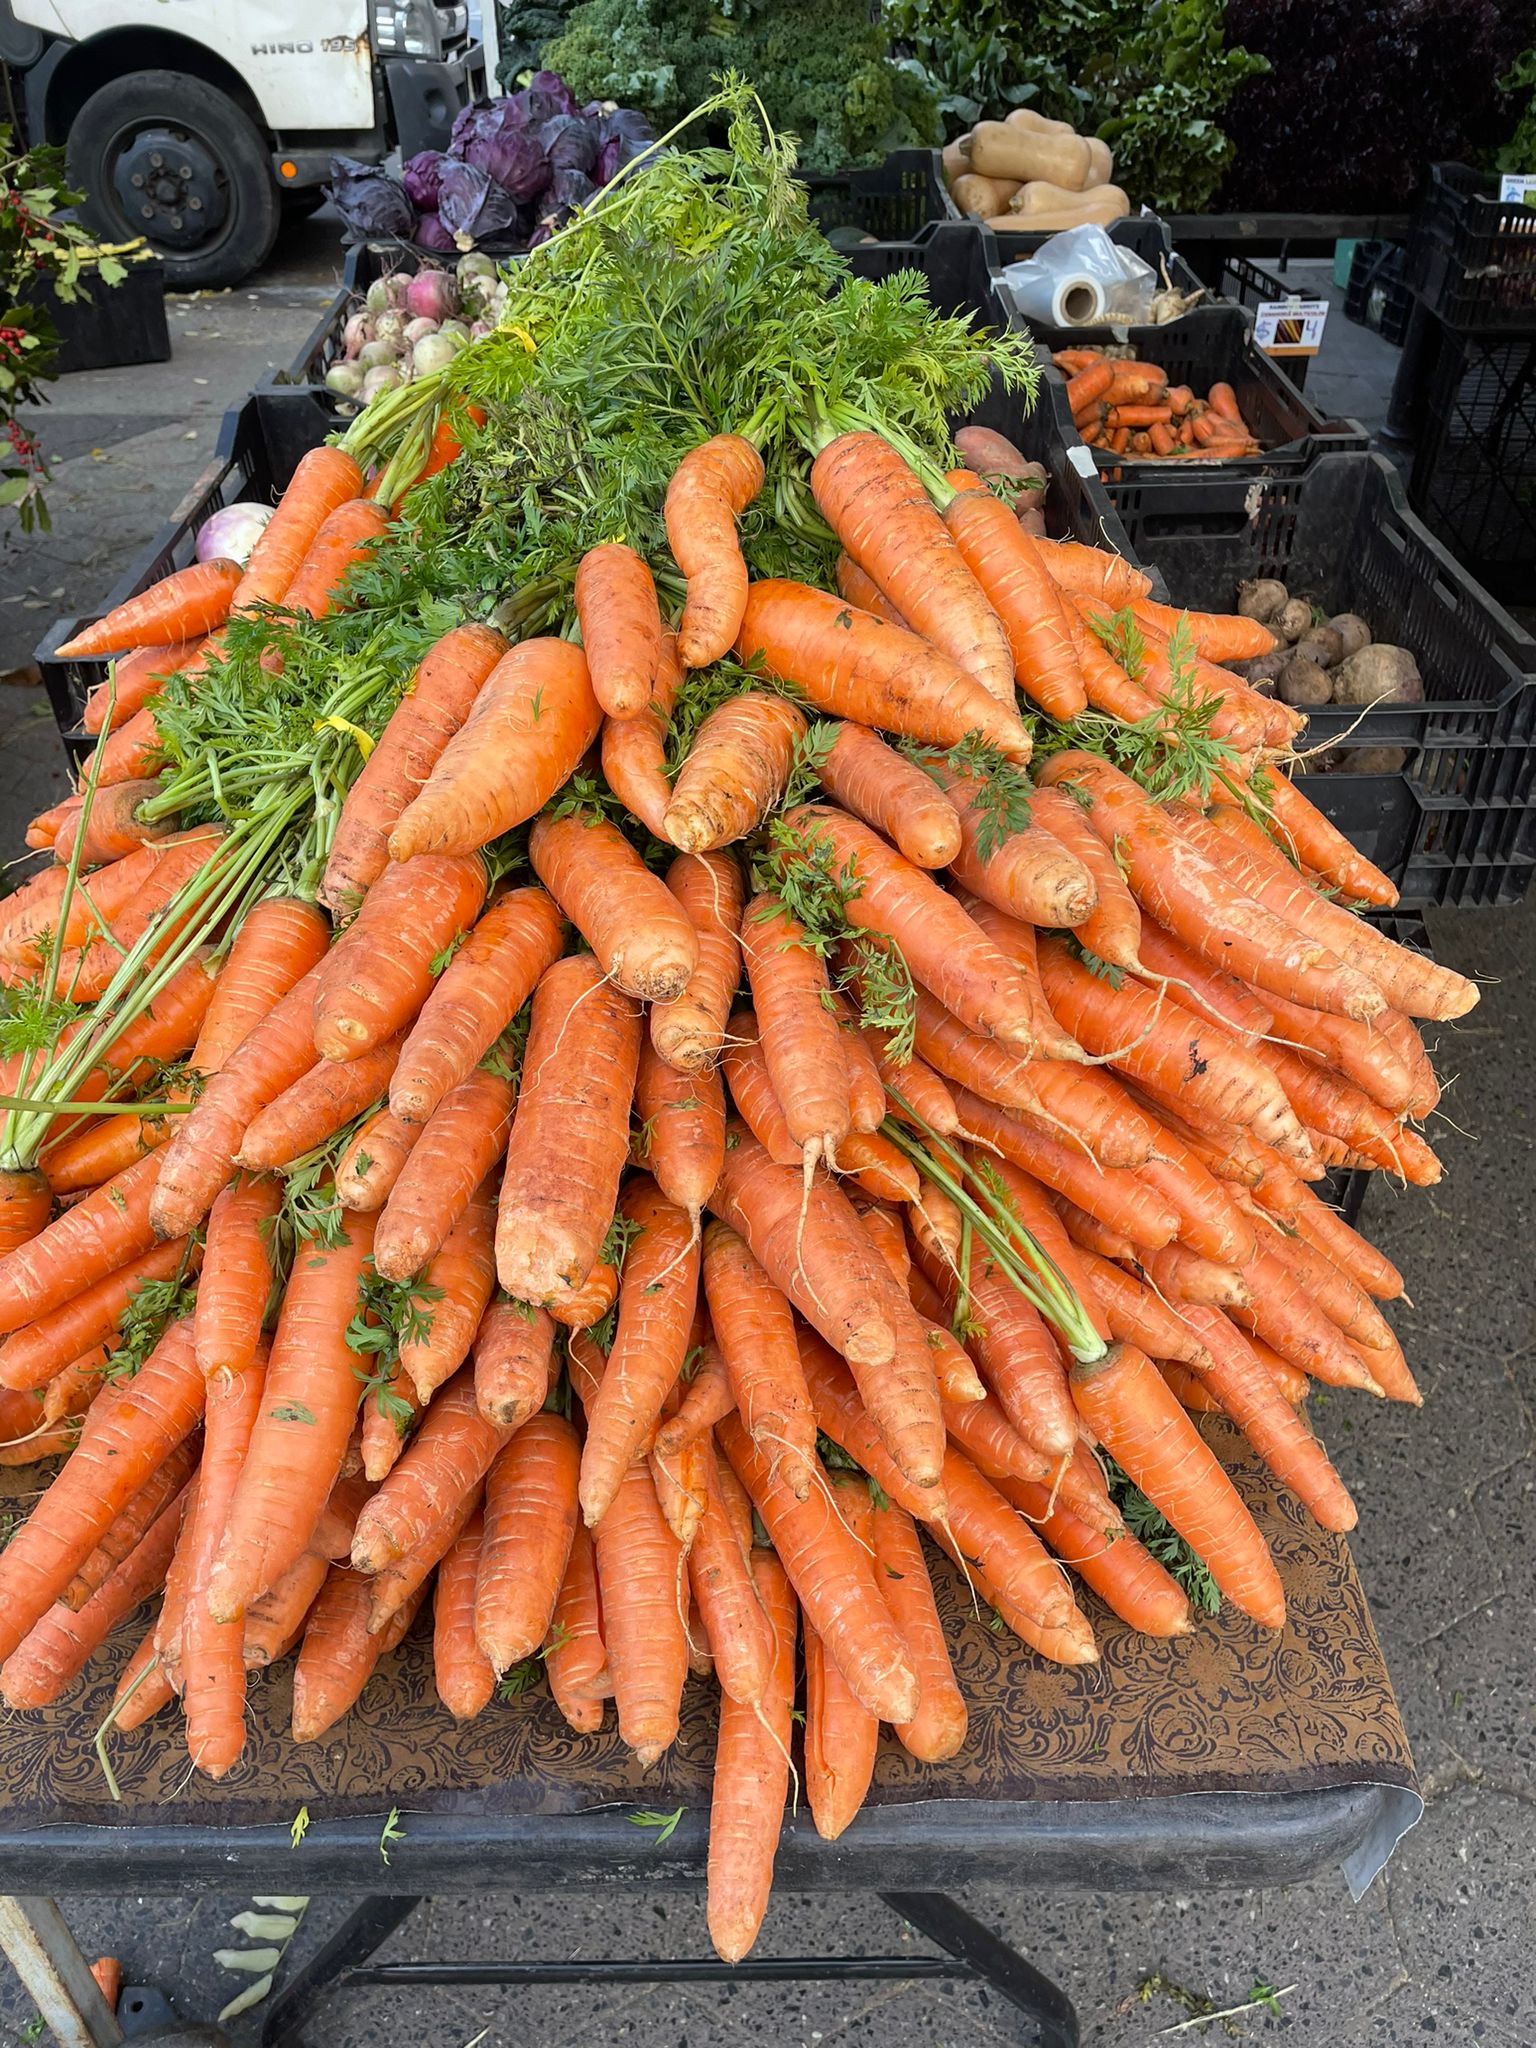 Picture of Carrots at Union Square Farmers Market